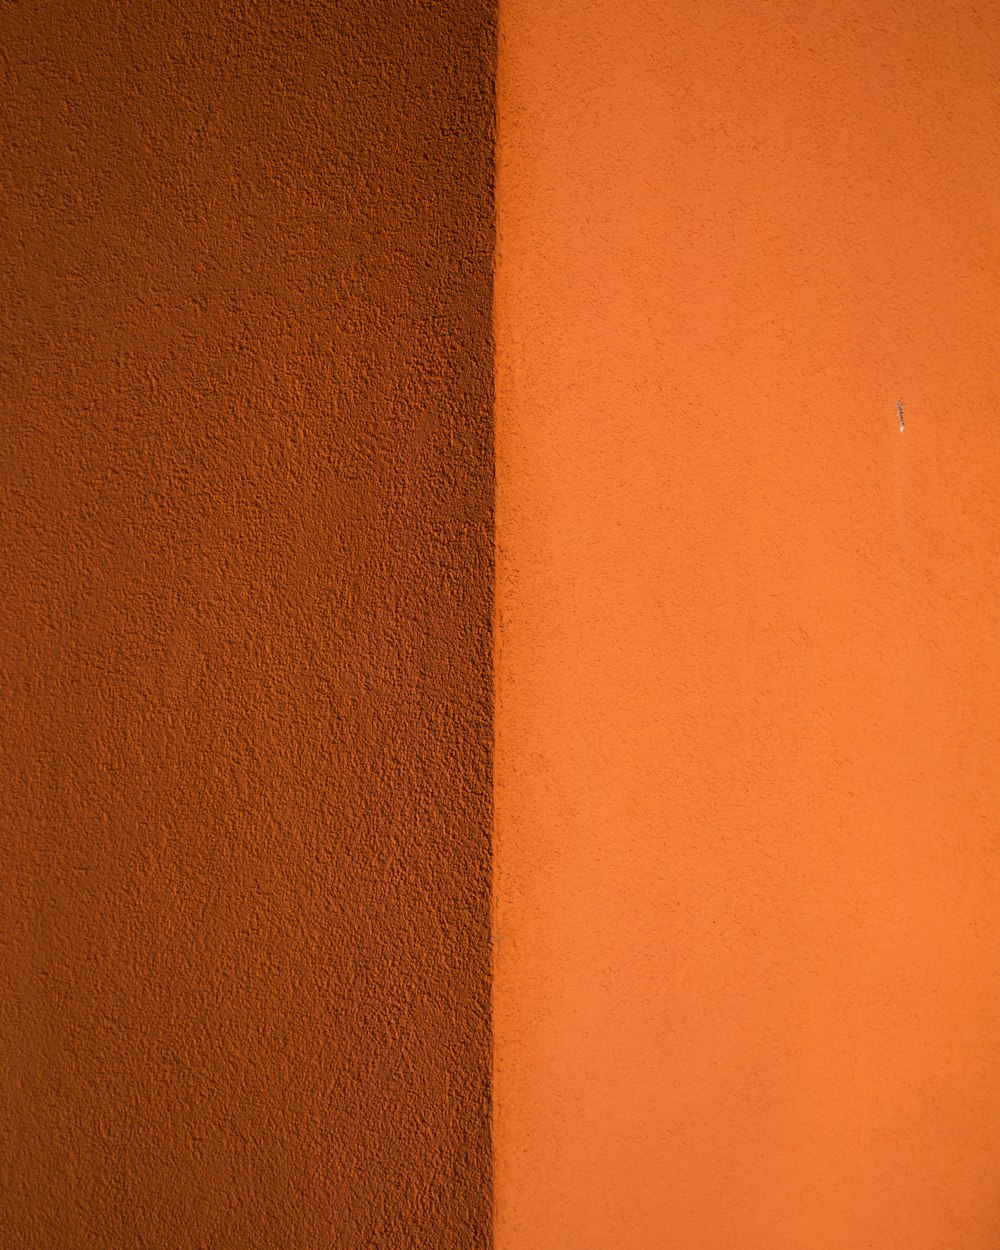 orange wall paint near brown wooden table